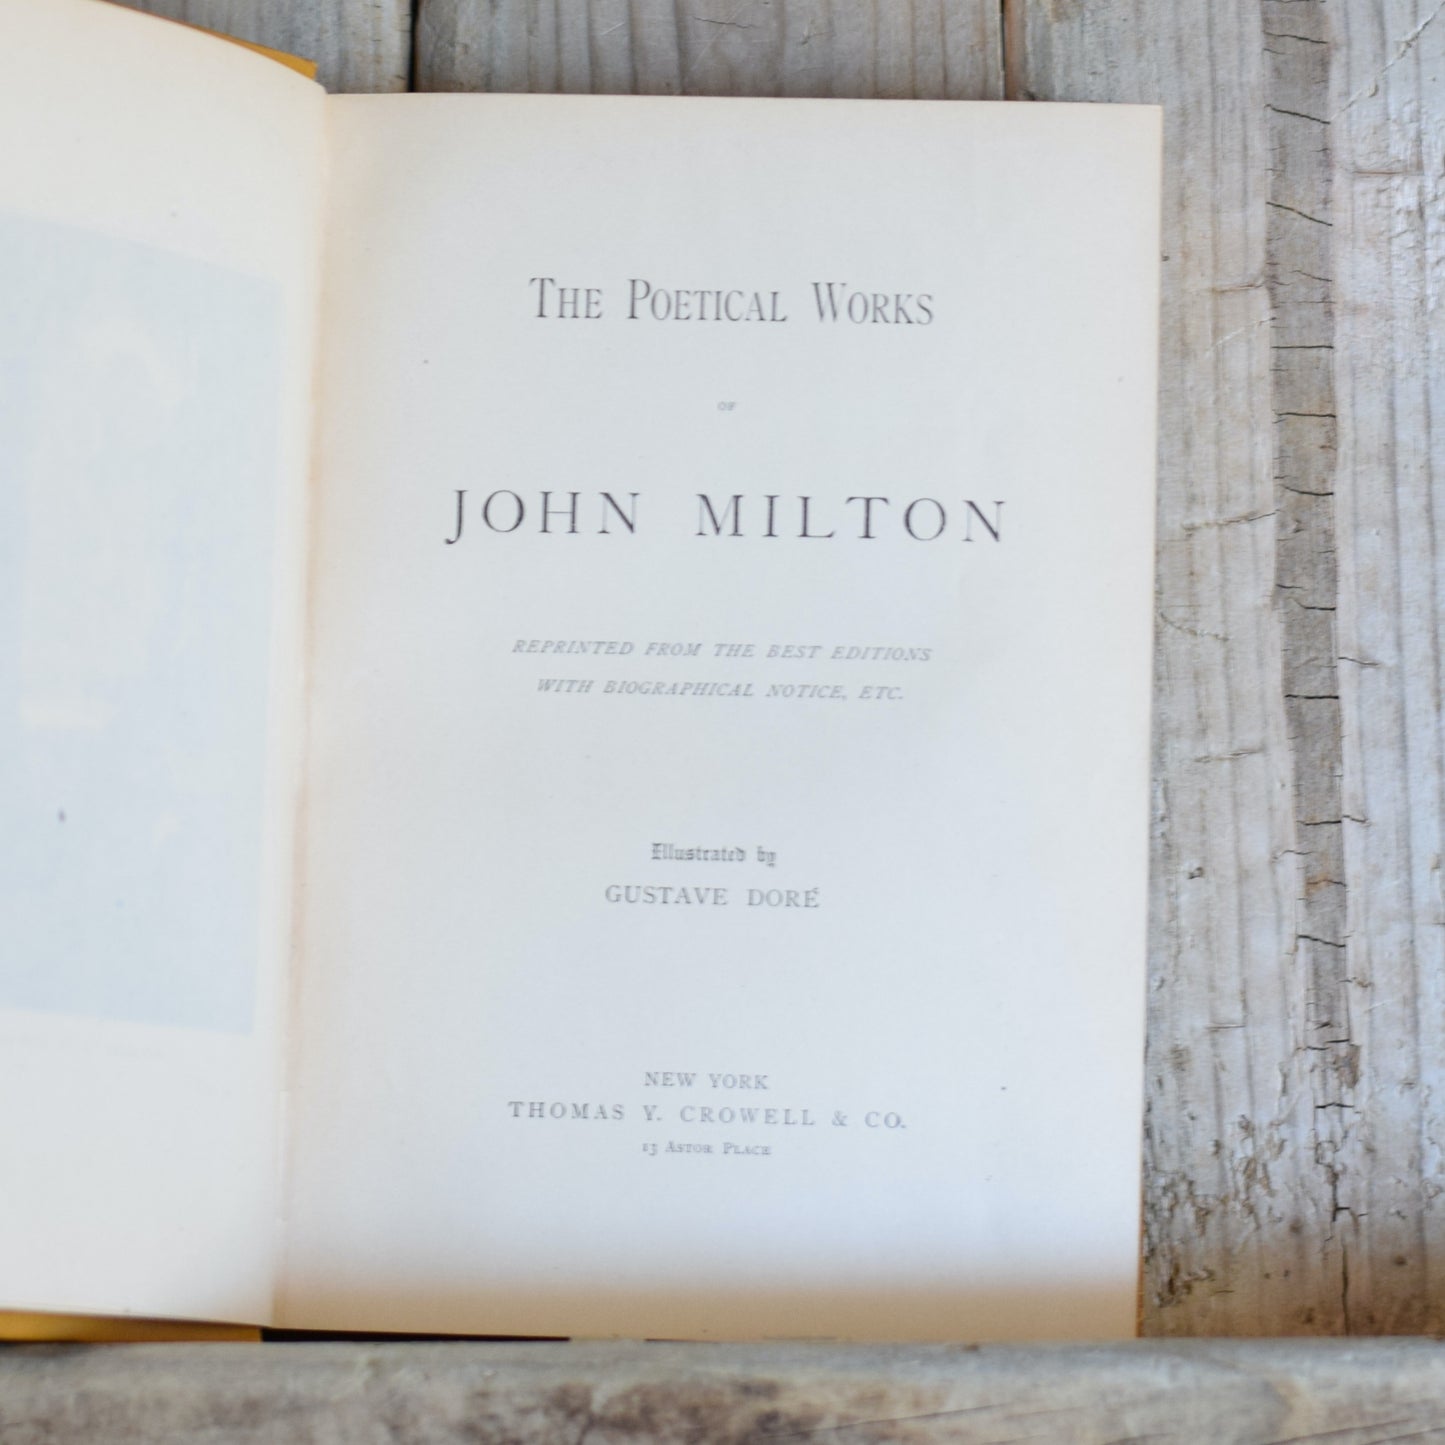 Vintage Poetry Hardback: The Illustrated Poetical Works of John Milton, Illustrated by Gustave Dore